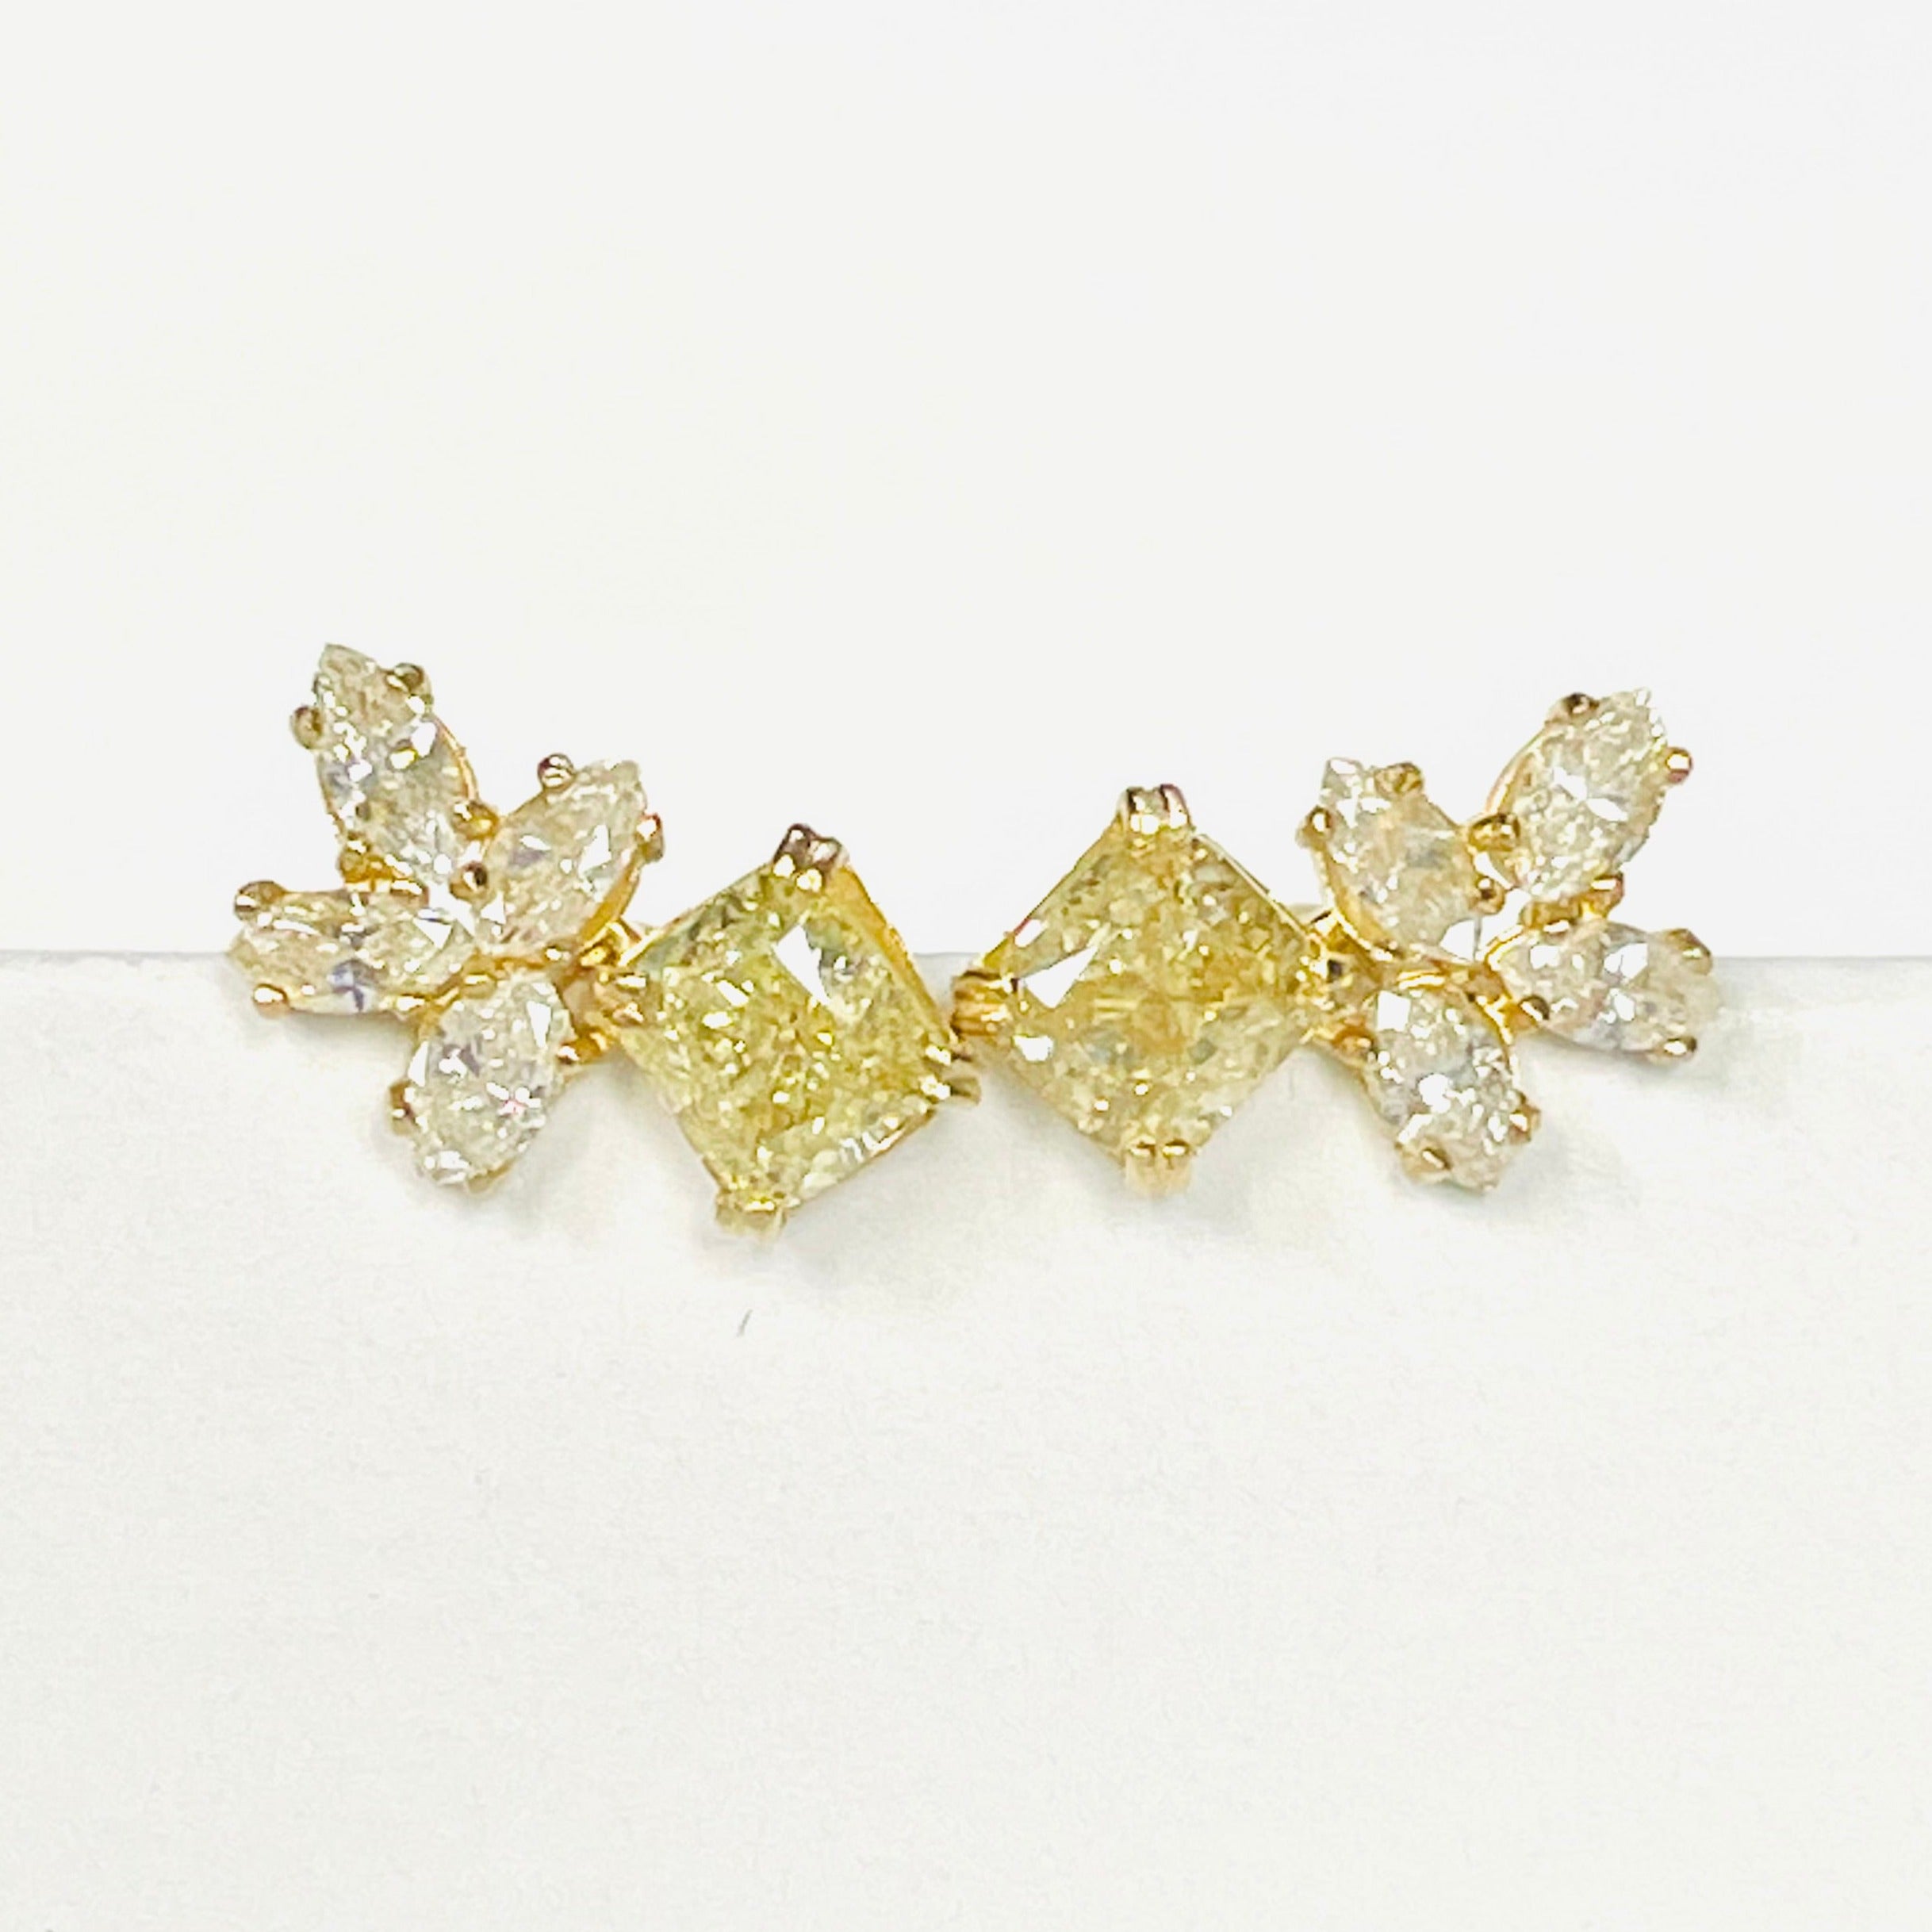 1.3CTW Canary Cushion and Marquis Diamond Stud Earrings 14K Gold